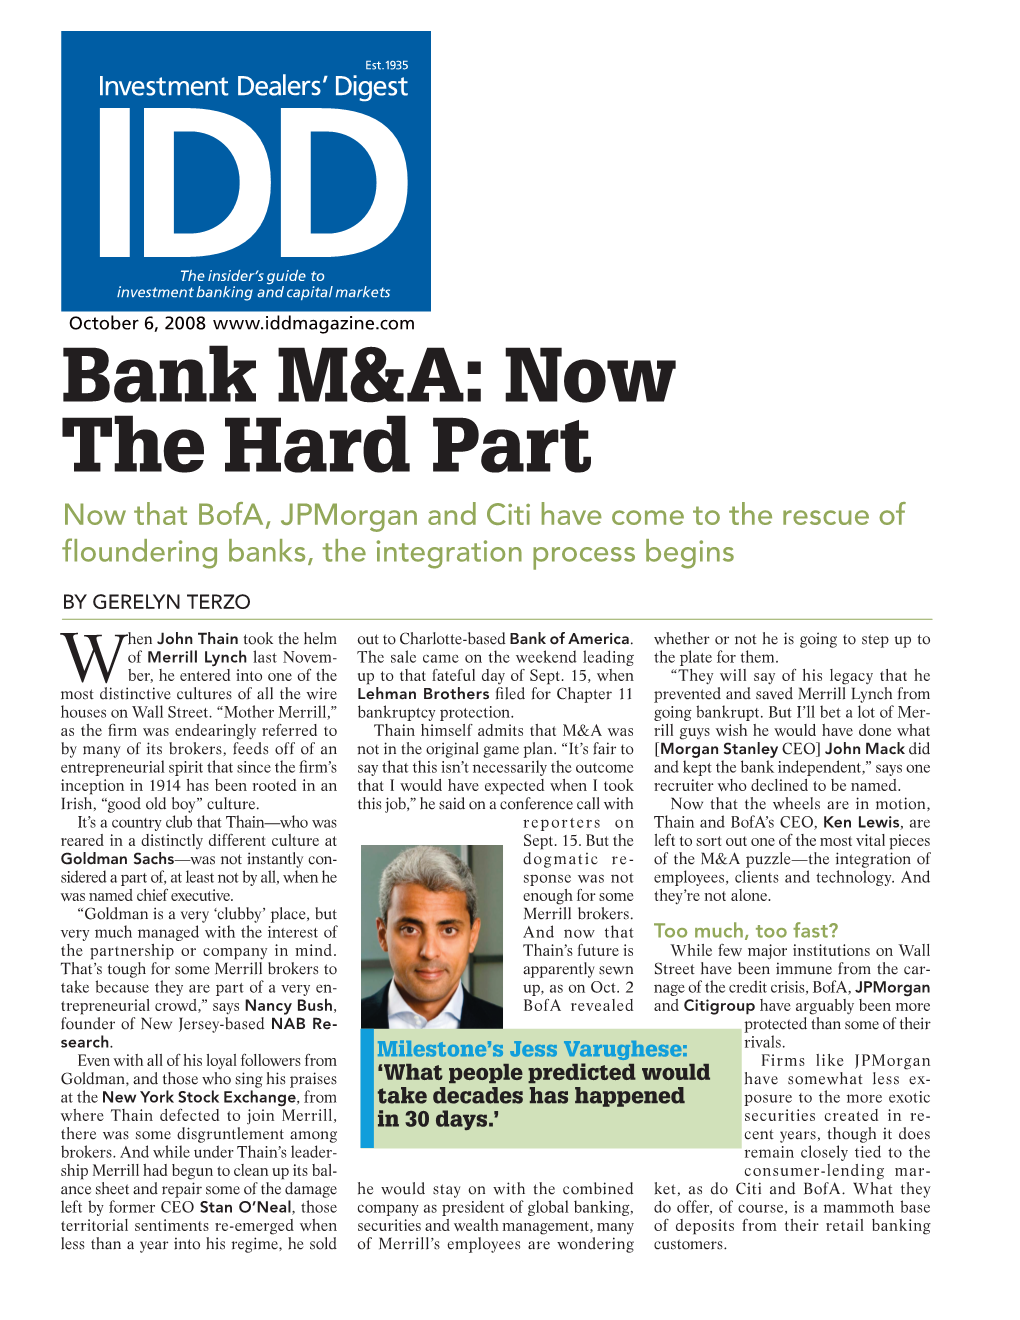 Bank M&A: Now the Hard Part